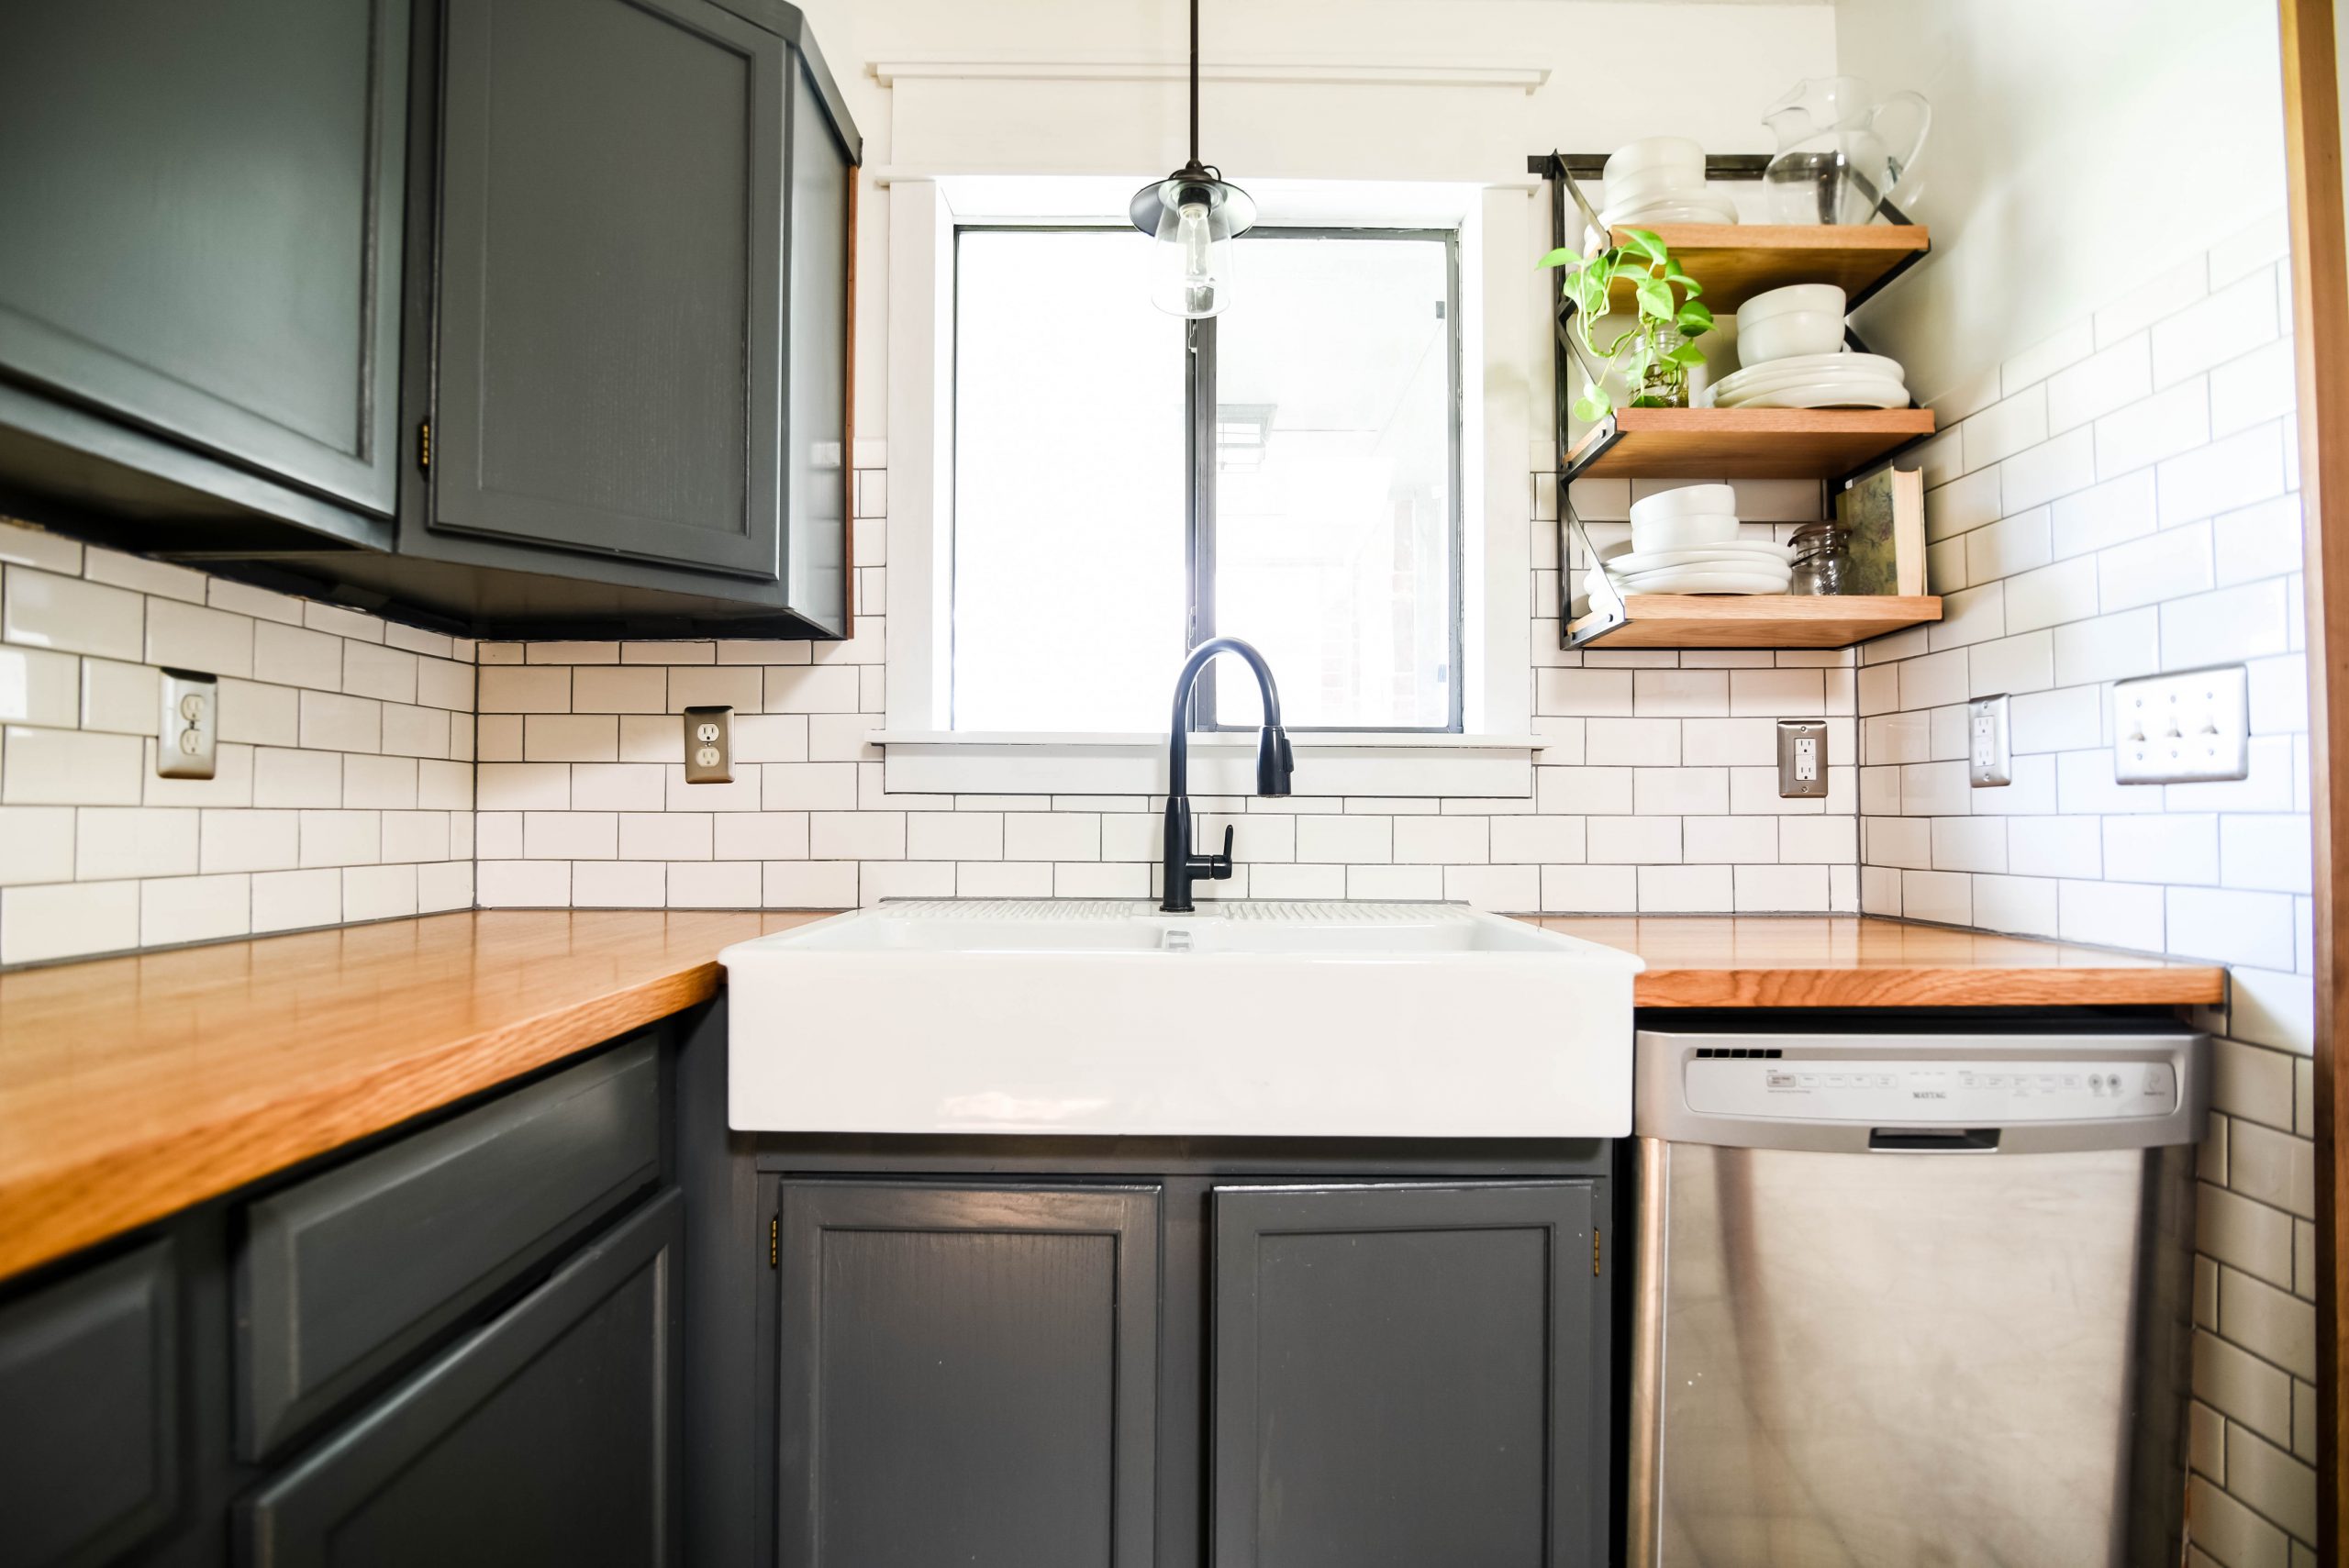 How To Install A Subway Tile Backsplash In The Kitchen Our